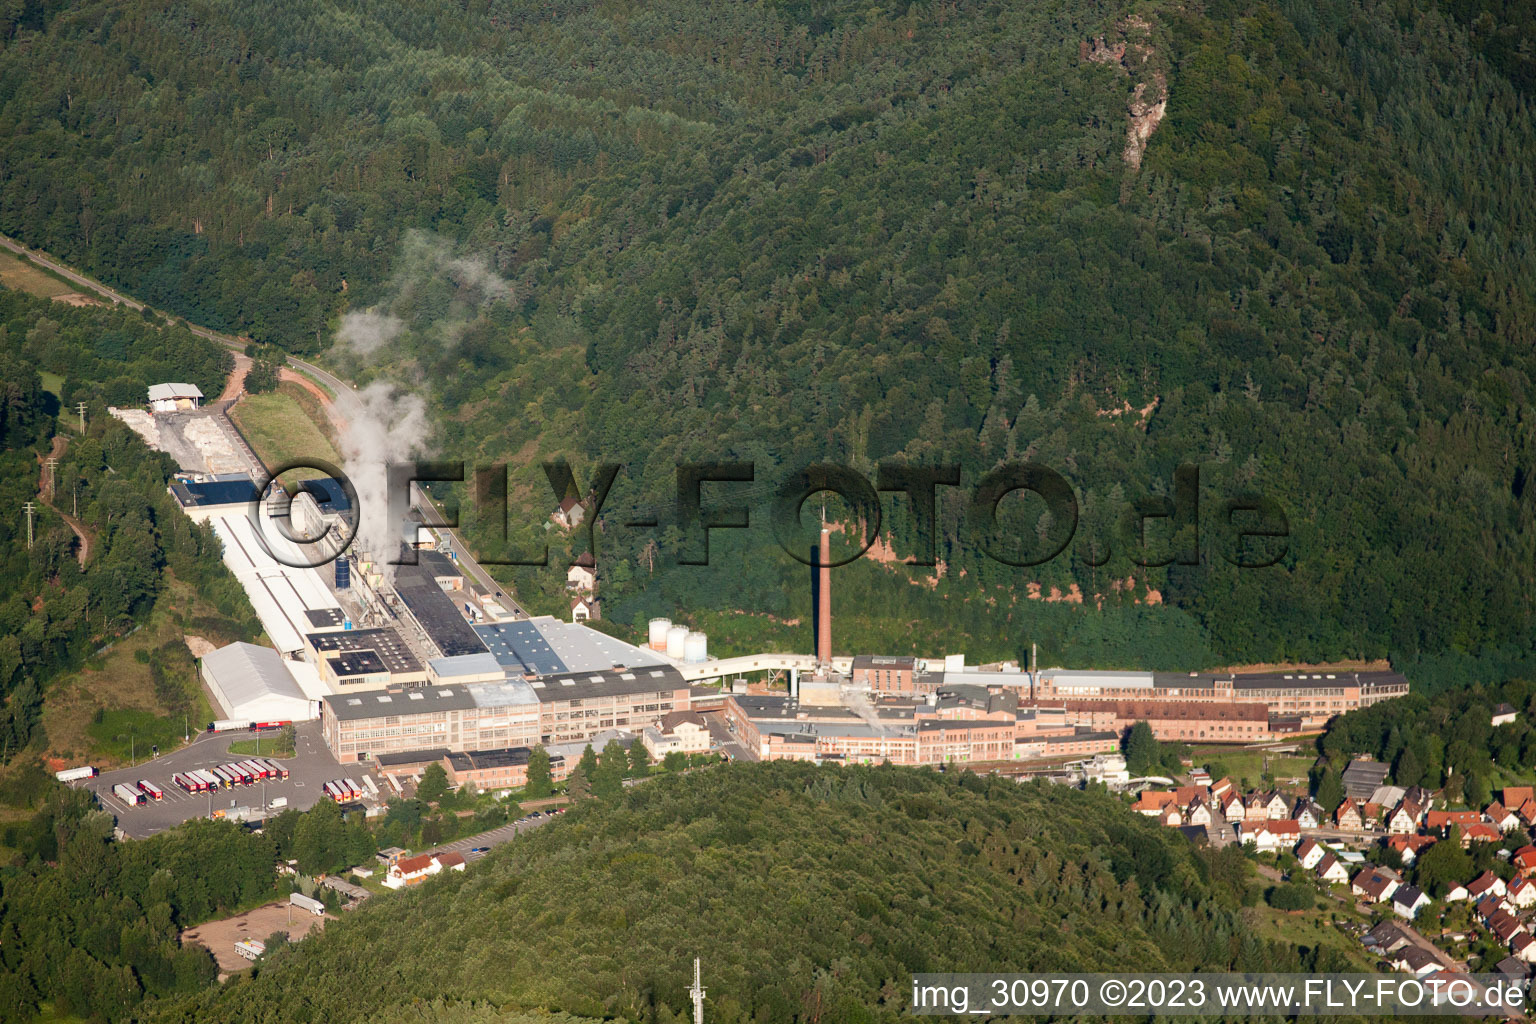 Aerial photograpy of Cardboard factory Buchmann GmbH in the district Sarnstall in Annweiler am Trifels in the state Rhineland-Palatinate, Germany